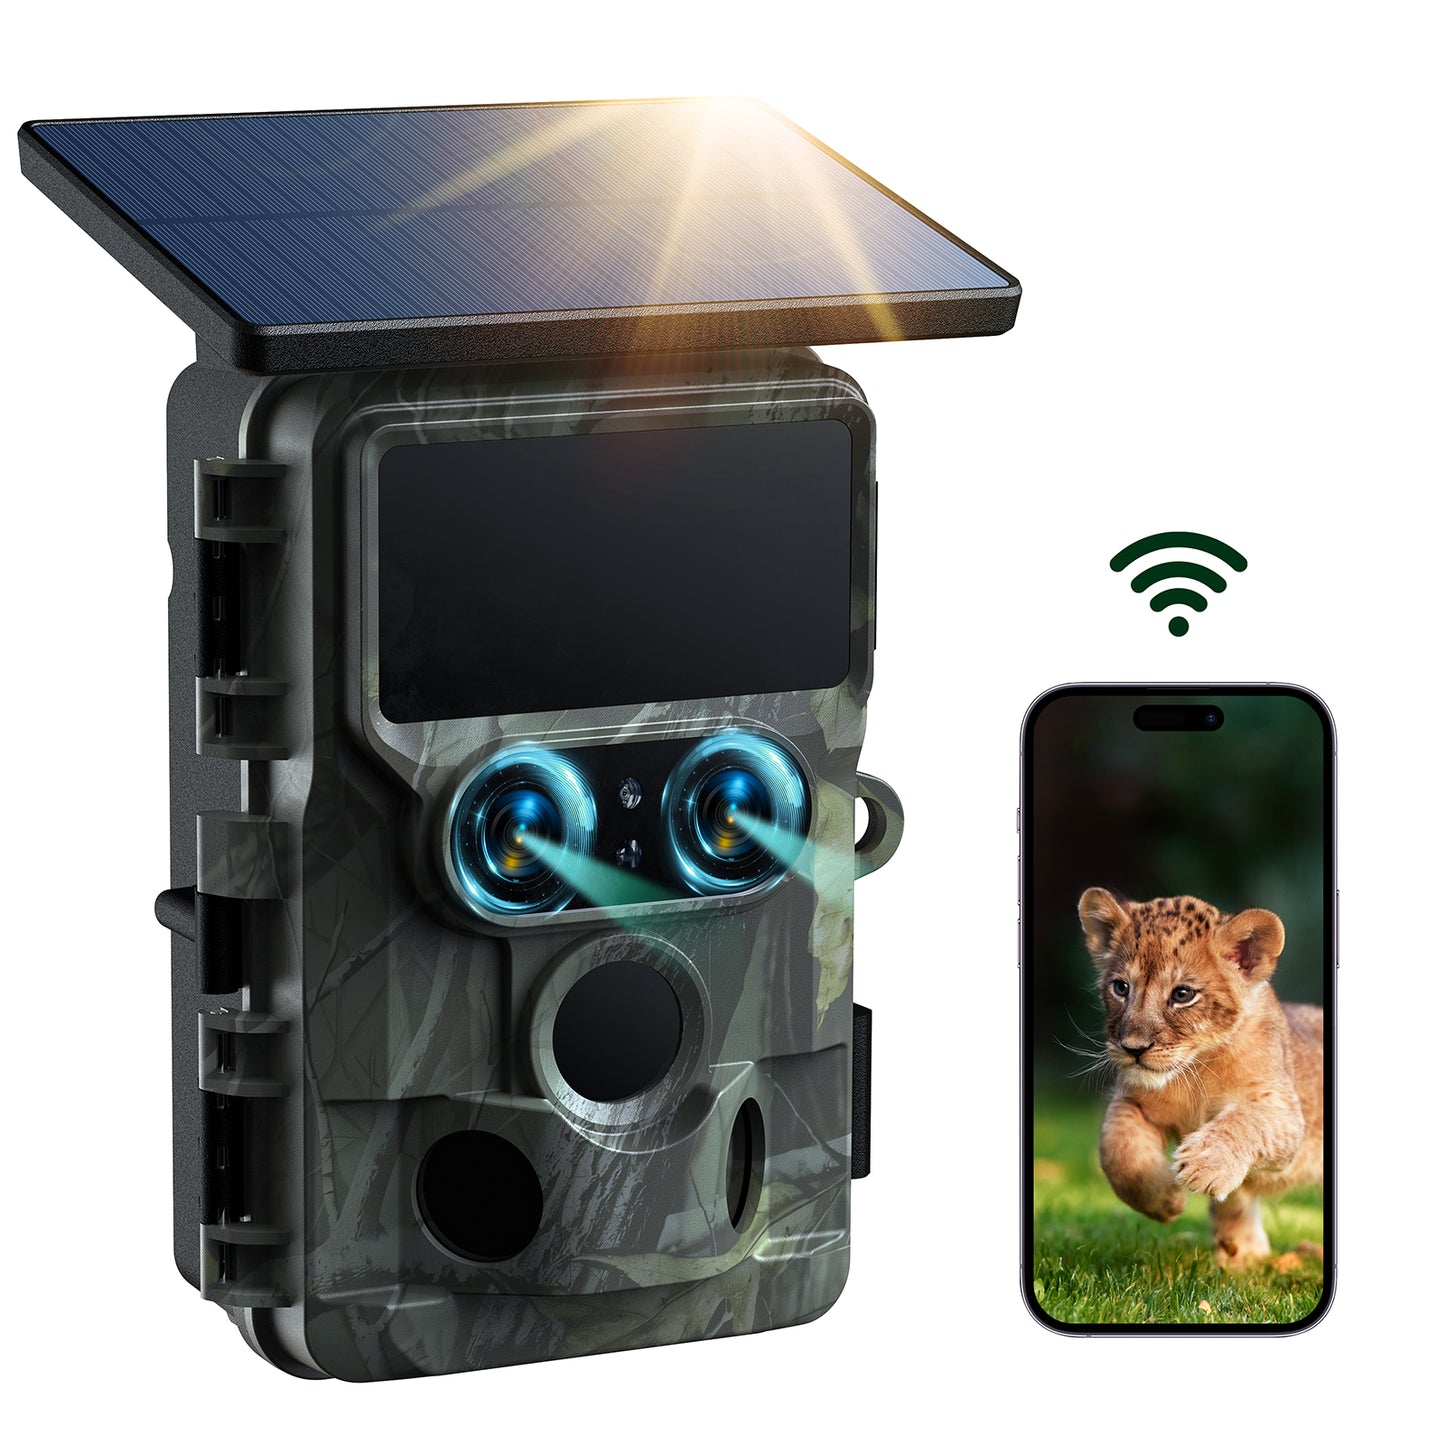 CAMPARK WiFi Trail Camera 4K UHD 30FPS Integrated Solar Powered, Starlight Night Vision Dual Lens 60MP Bluetooth Game Camera with 0.1S Trigger IMX458 Sensors P66 Waterproof for Wildlife Monitoring